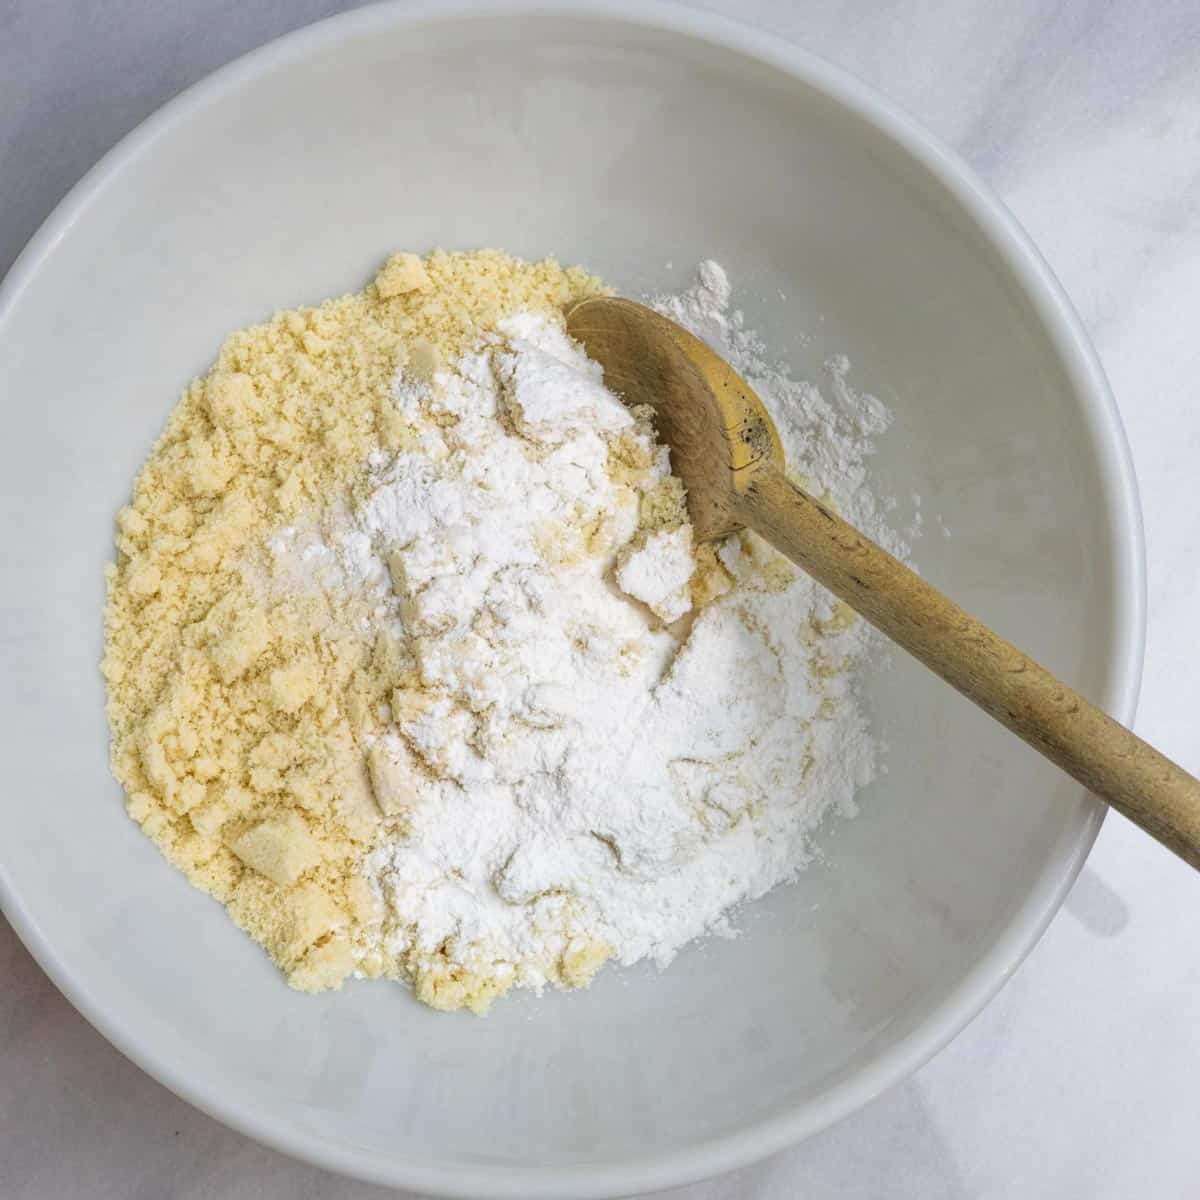 Process step showing dry ingredients for the cake in a mixing bowl with a wooden spoon in the bowl.